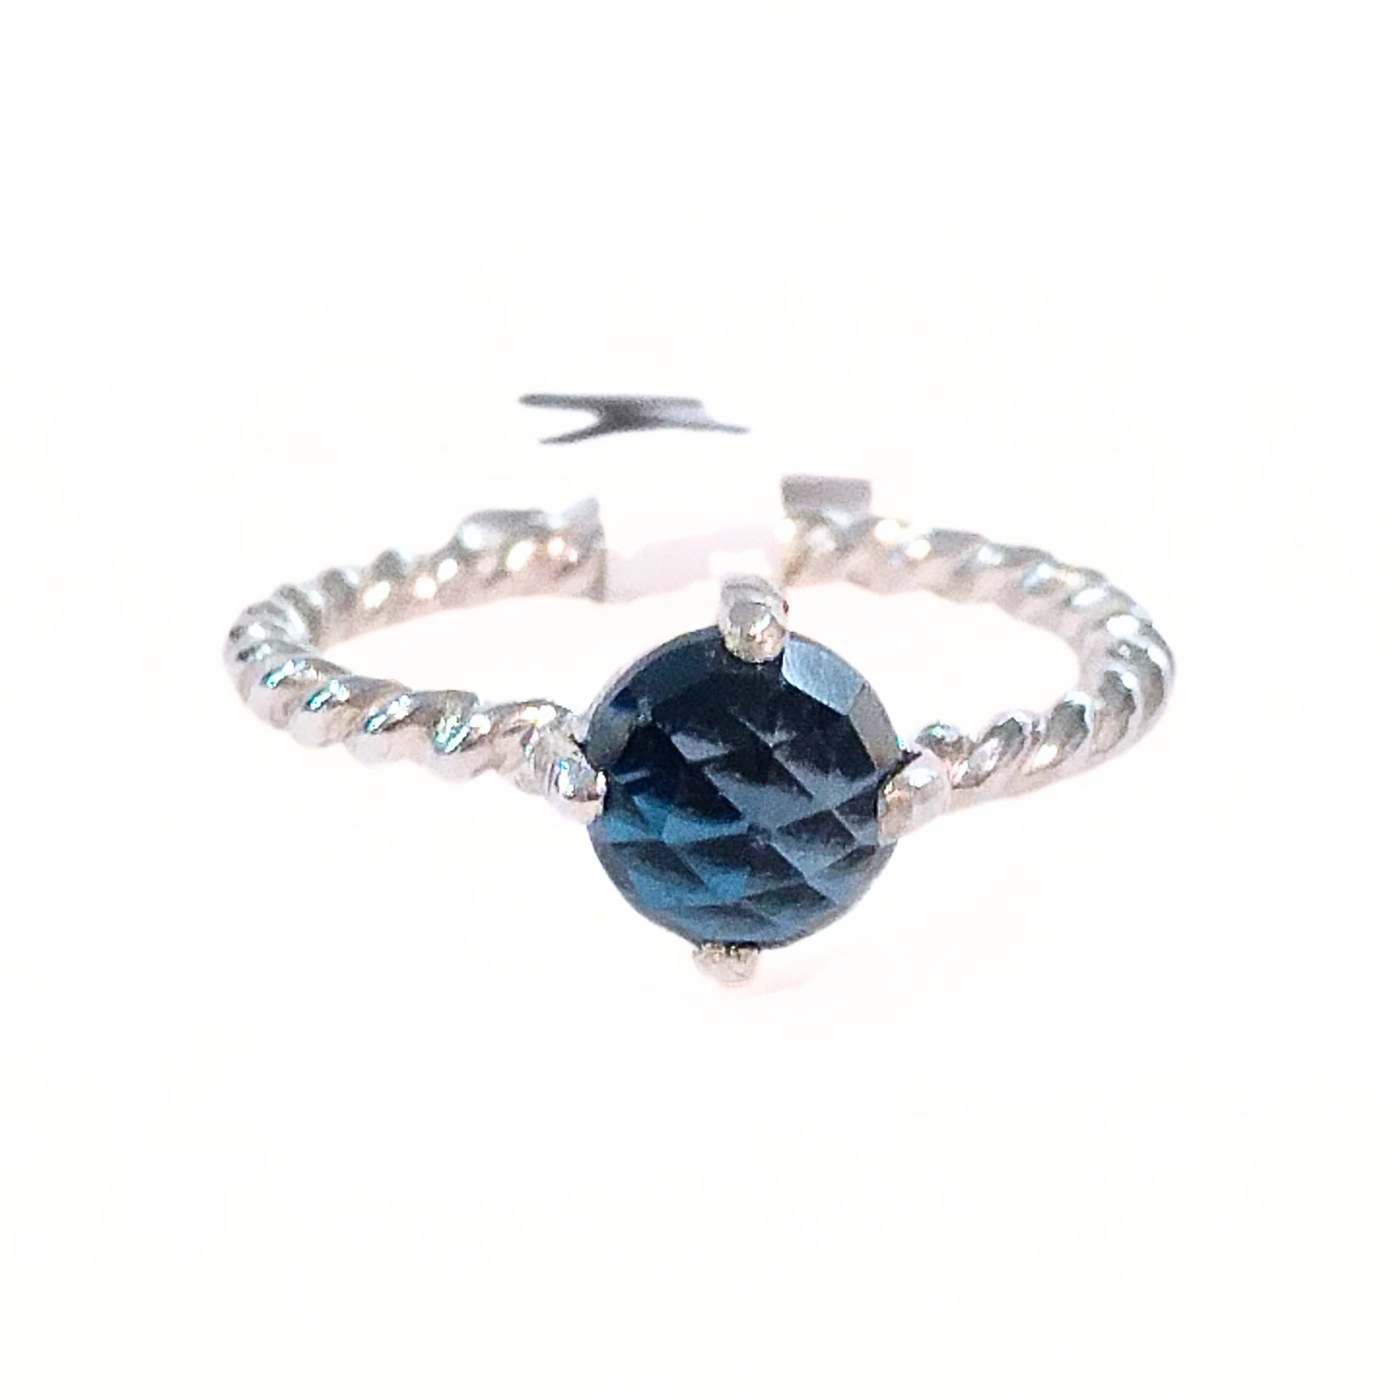 SM-370 London Blue Topaz Twisted Band Ring (5.5)